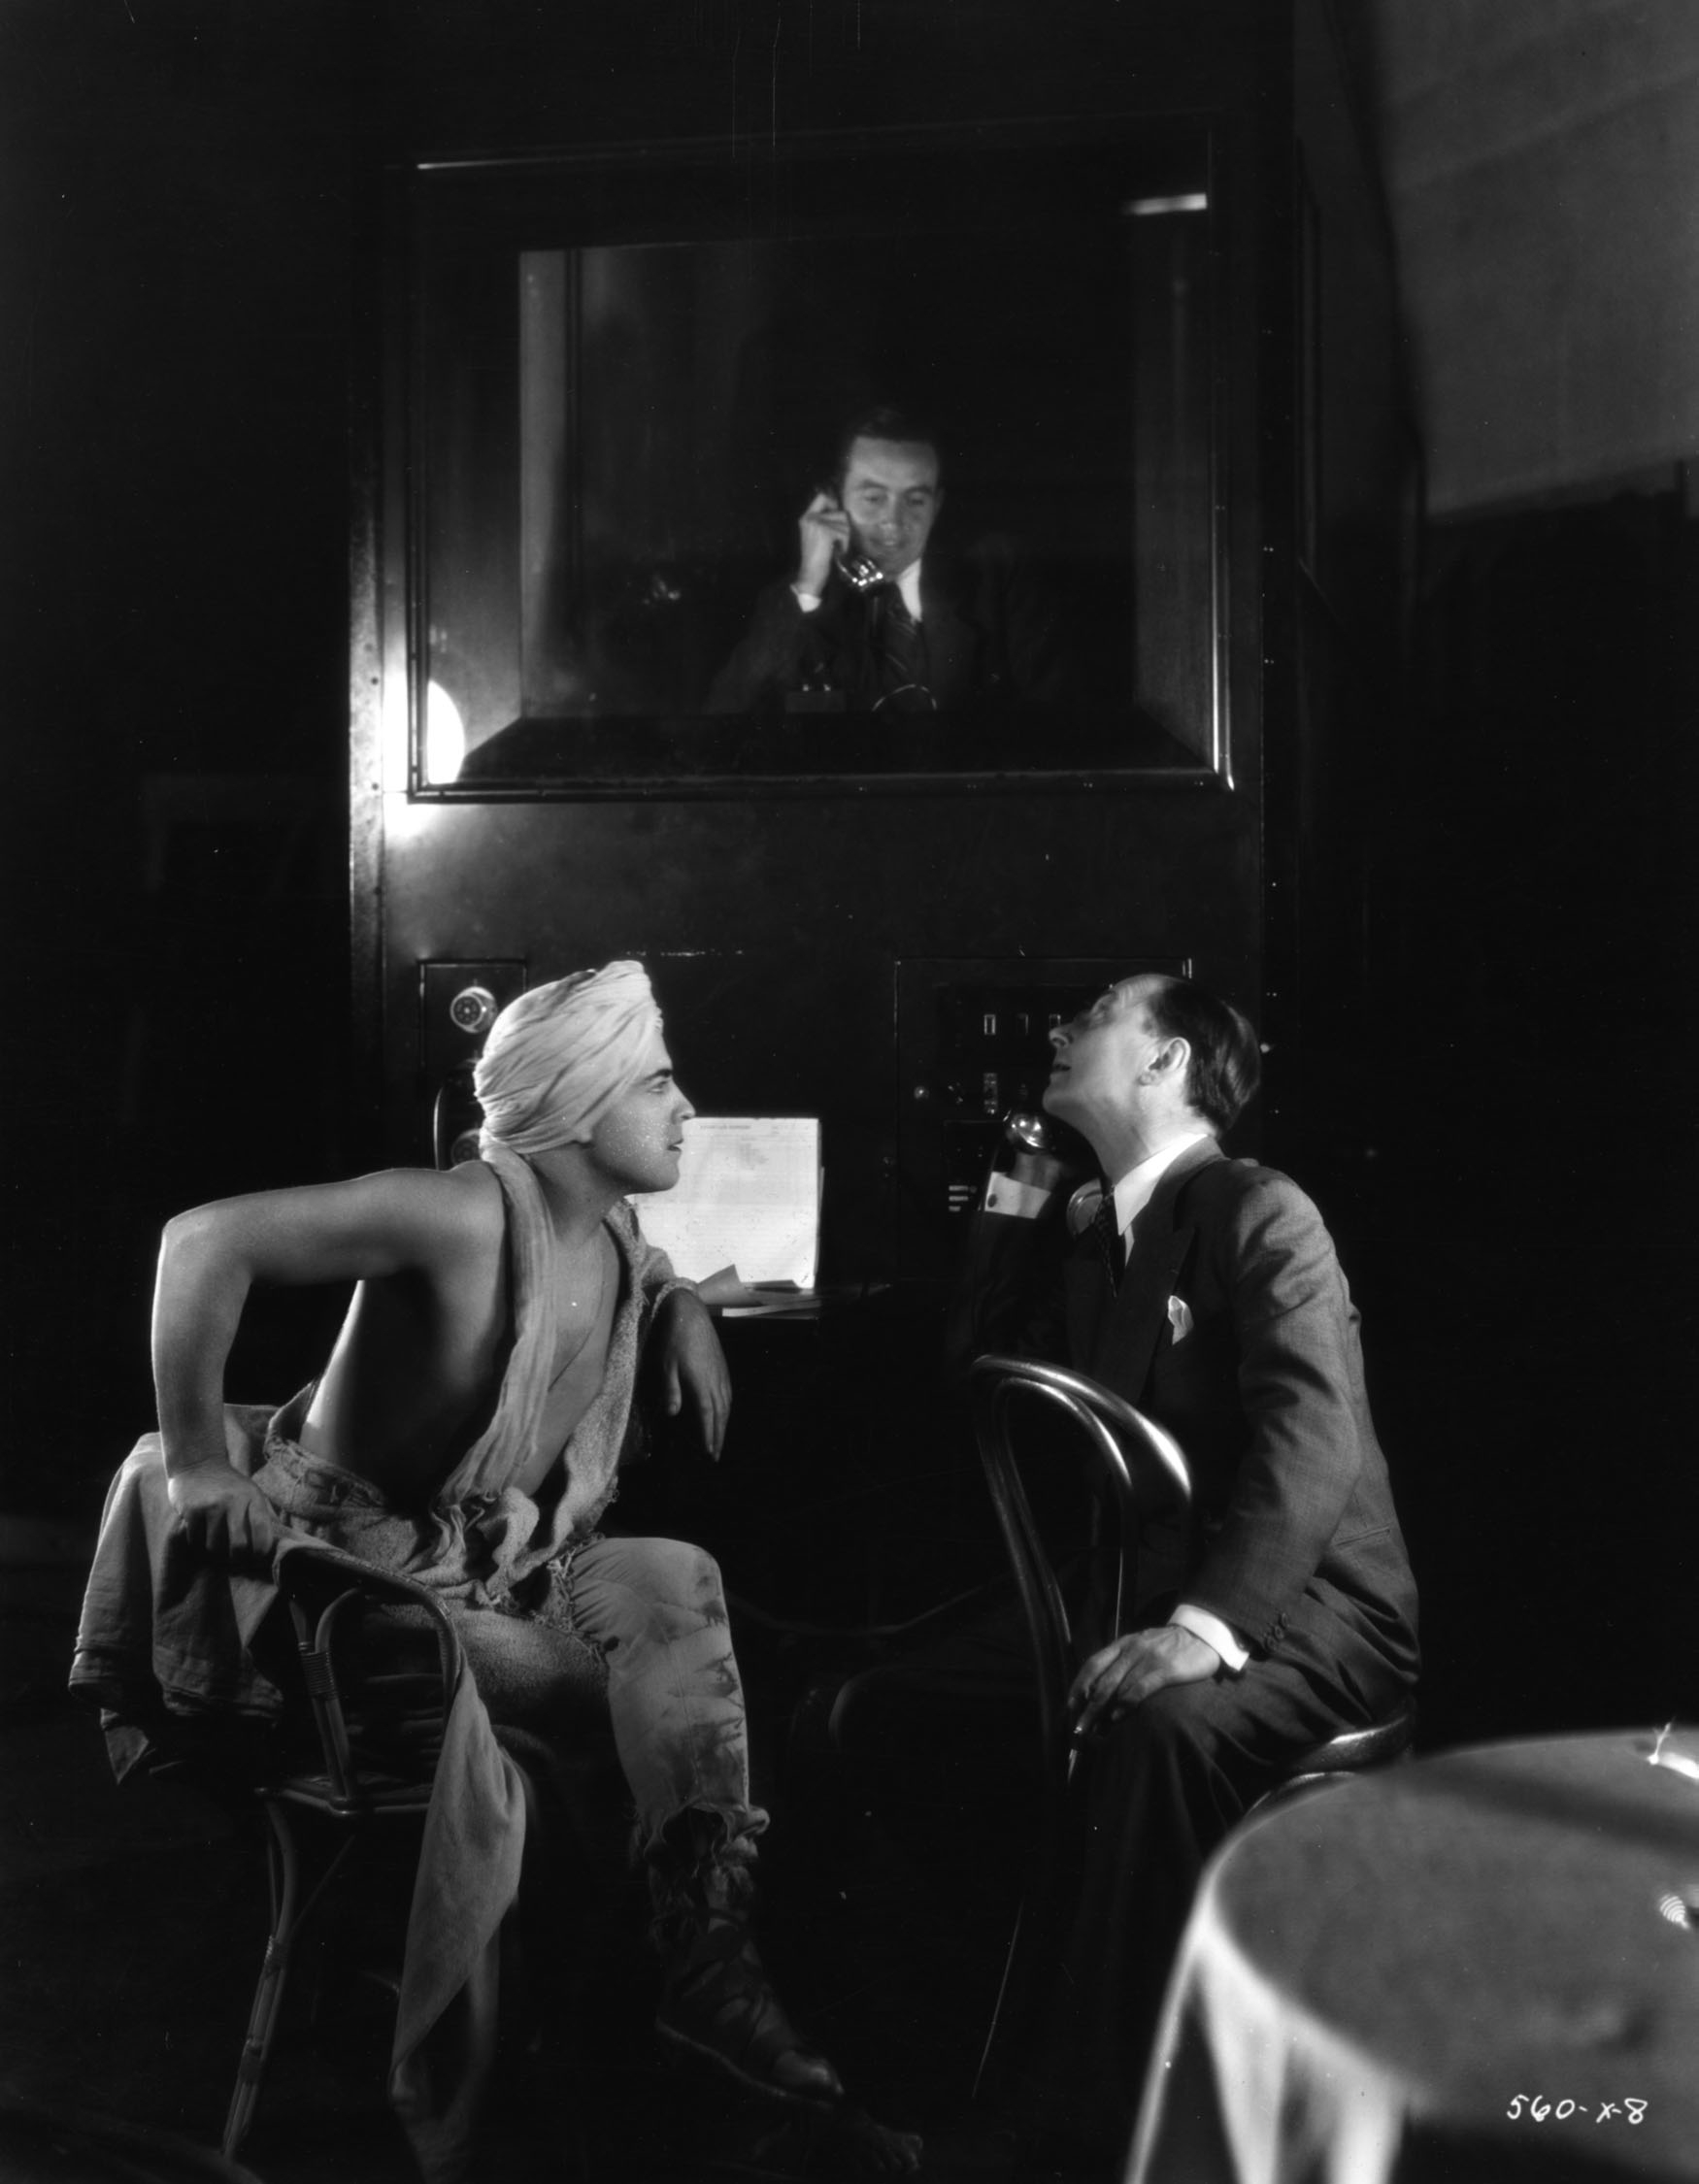 Director Jacques Feyder and star Ramon Novarro on the set of the 1931 early sound feature Son of India (originally titled "Son of Rajah"). Original caption reads, "From his sound proof portable booth, via a horn on top of it, the 'mixer' tells star Ramon Novarro and director Jacques Feyder what he thought of the quality of dialogue in the previous scene of Novarro’s new M-G-M picture, 'Son of Rajah.'"